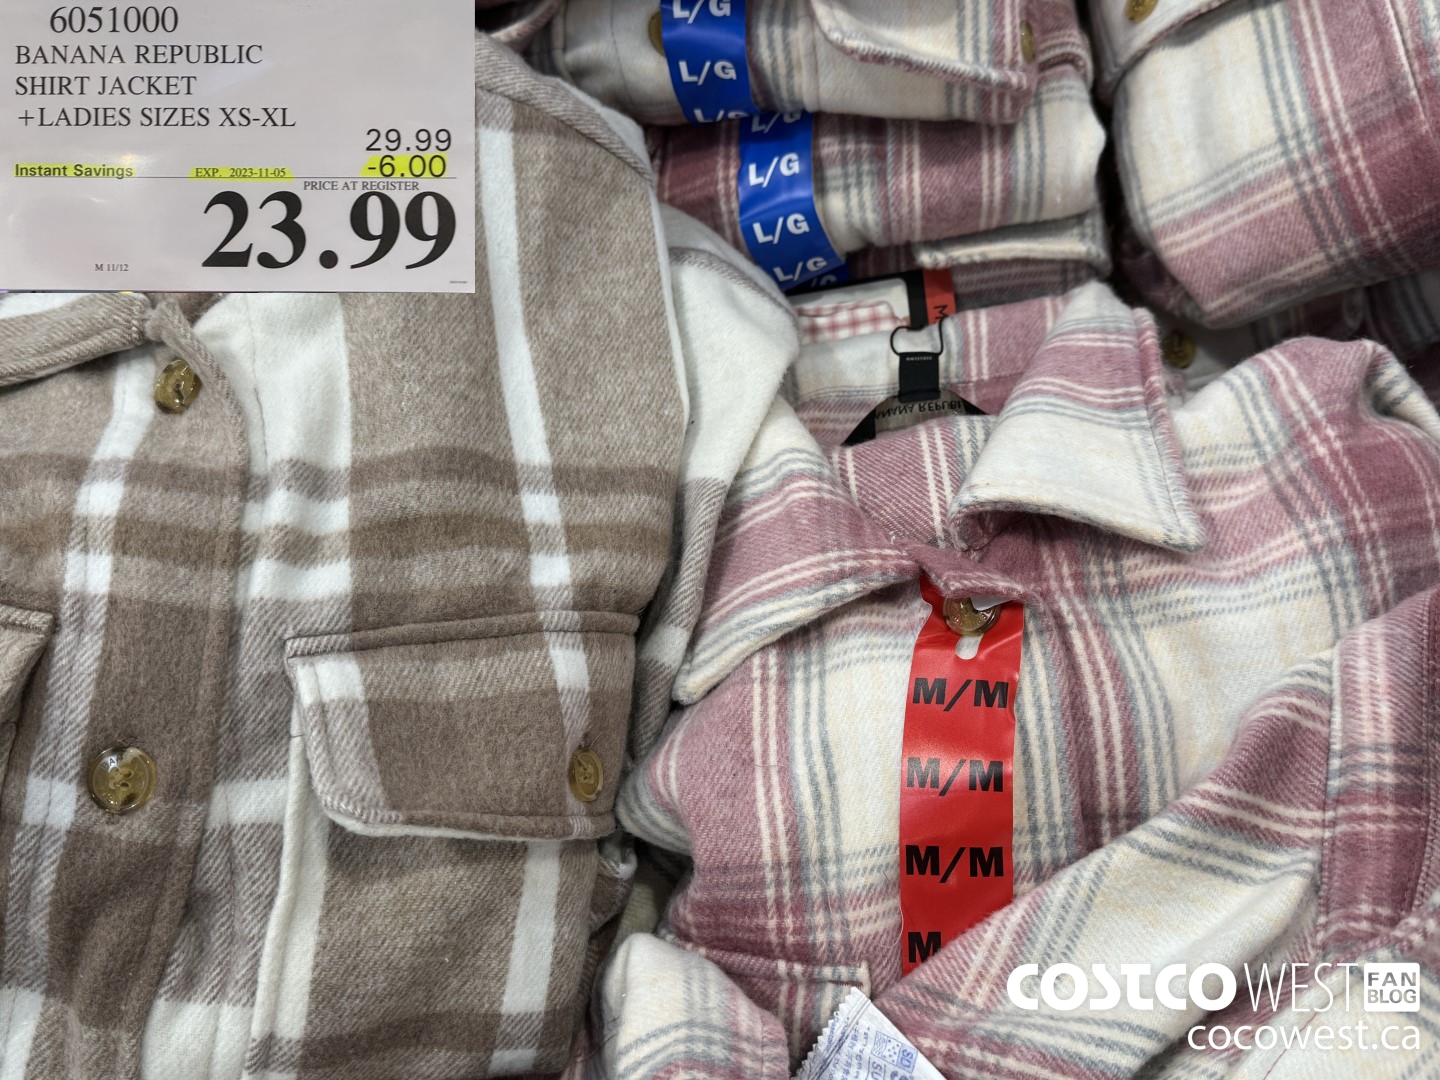 Costco Canada Fashion Deal of the Week! This Tommy Hilfiger jacket